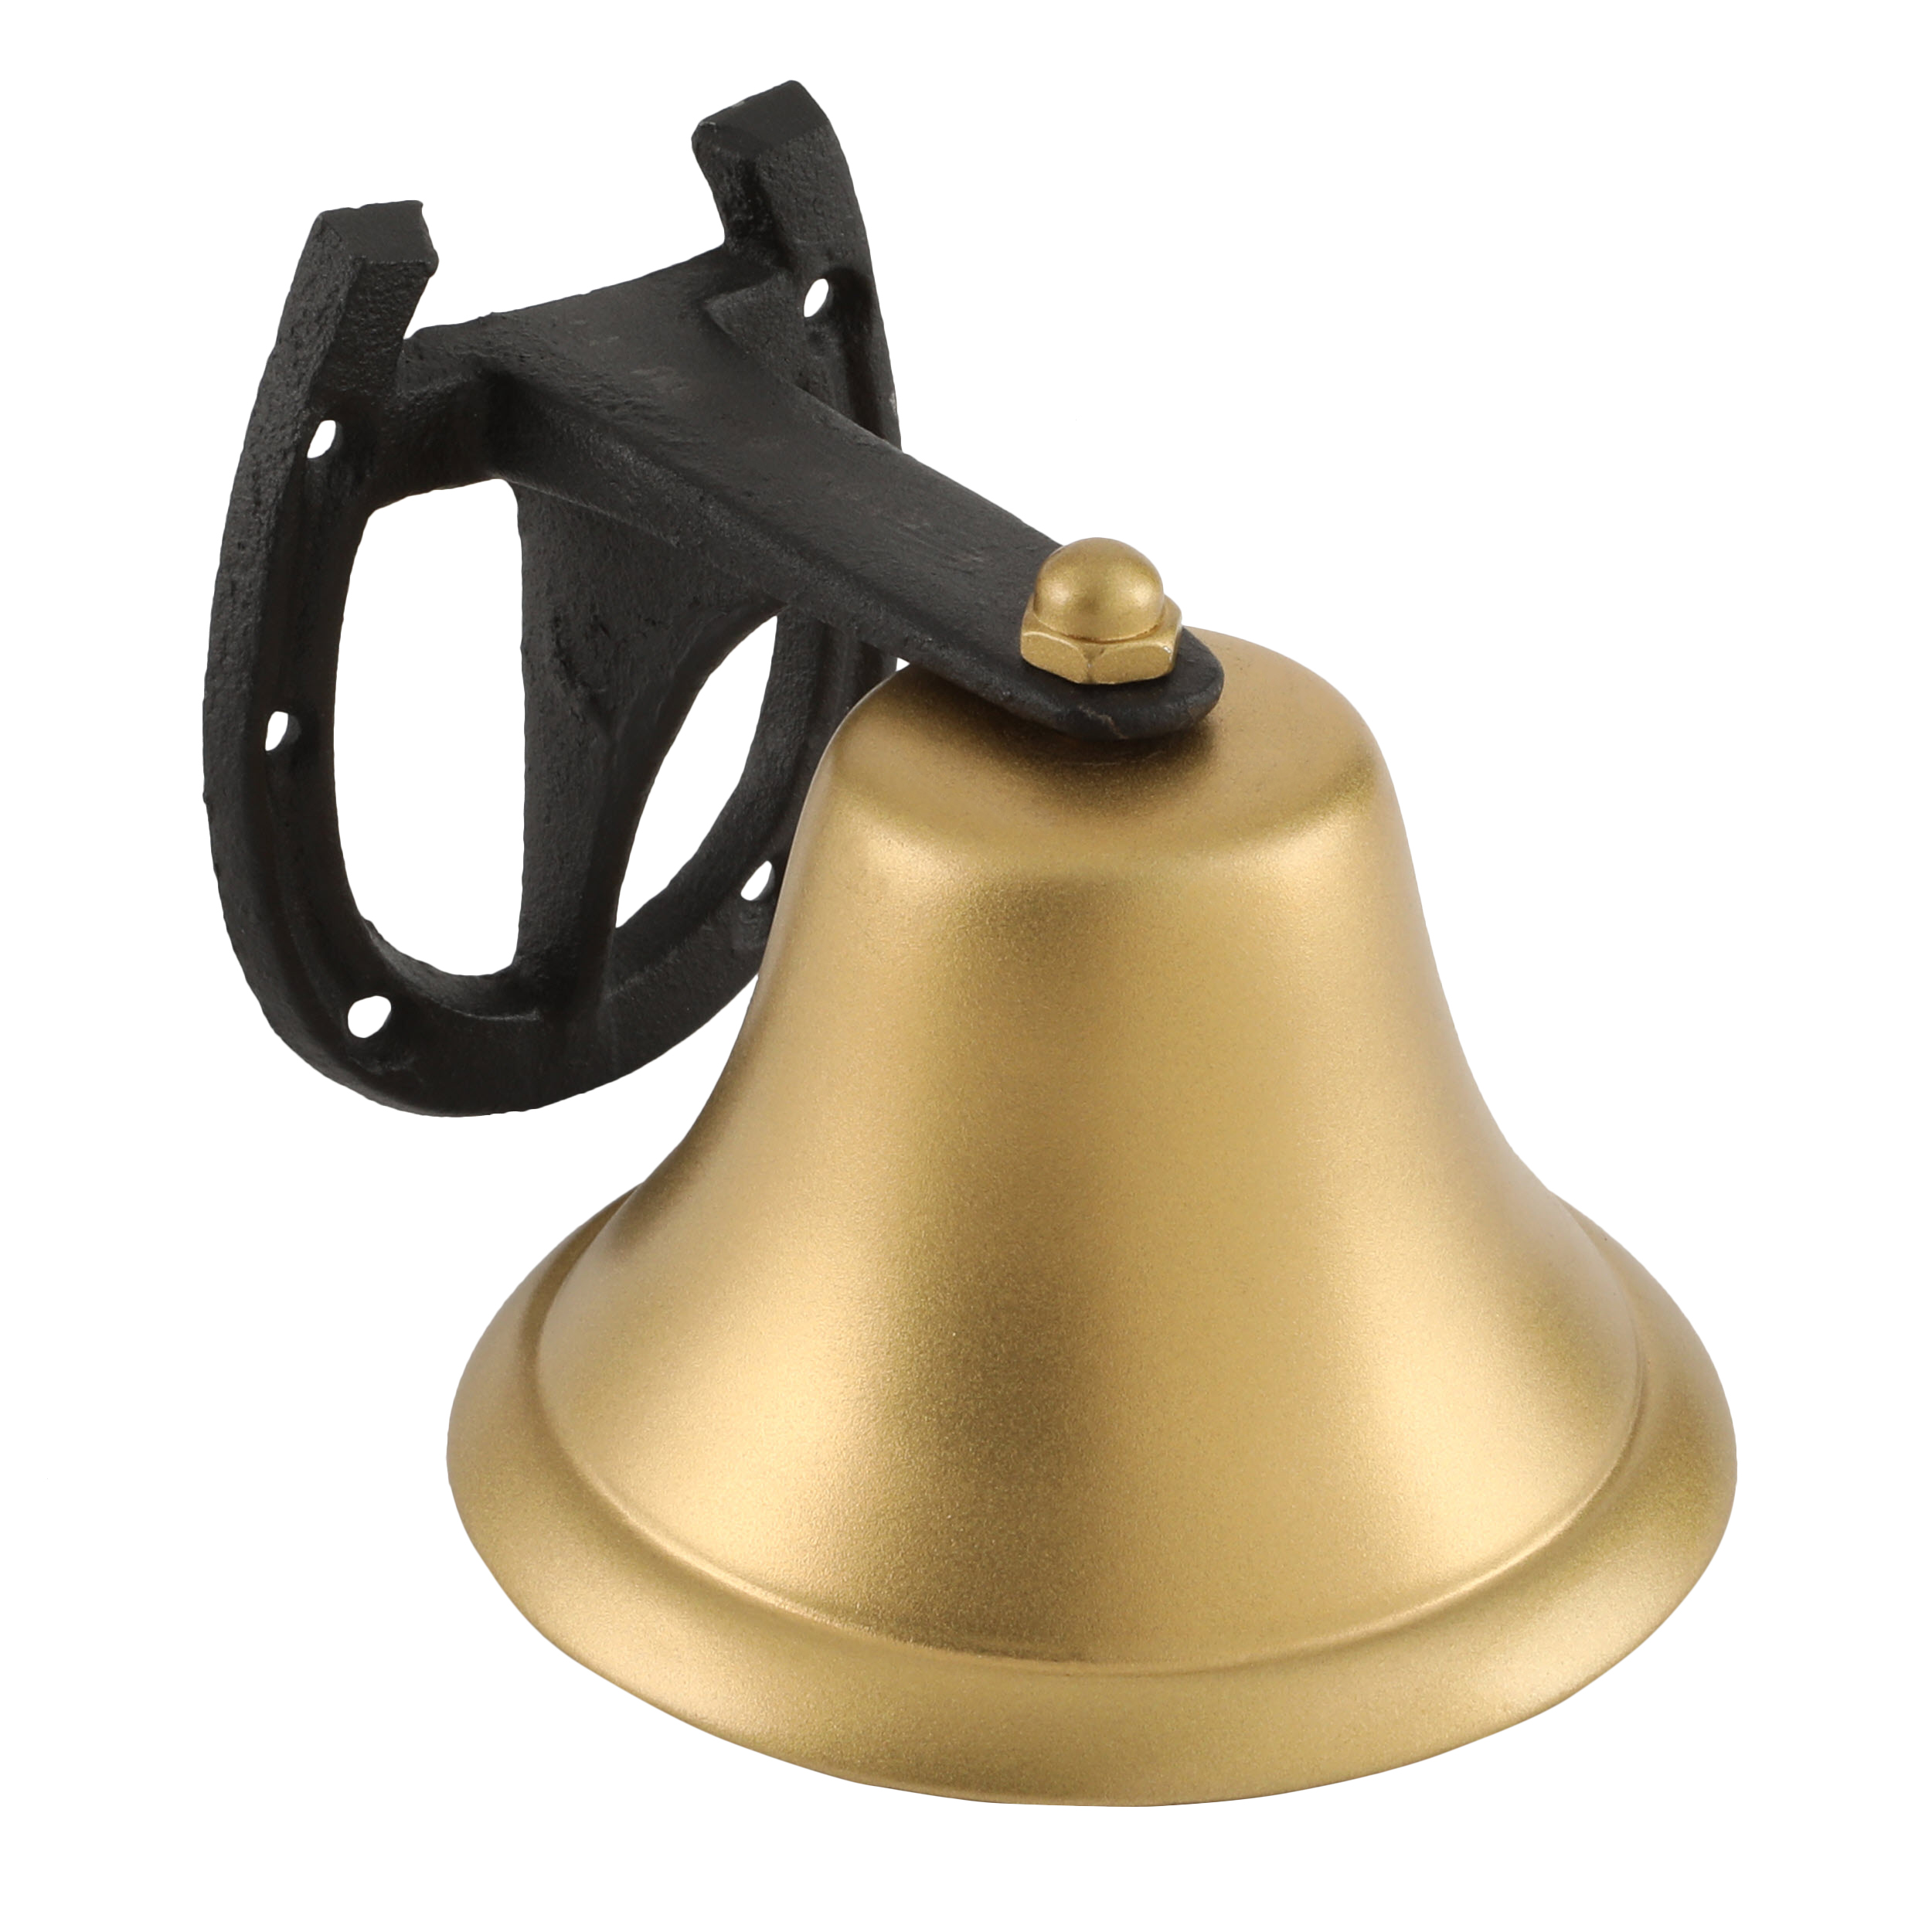 Gorilla Playsets Metal Dinner Bell Accessory with Black Horseshoe Mount - Gold - image 4 of 4